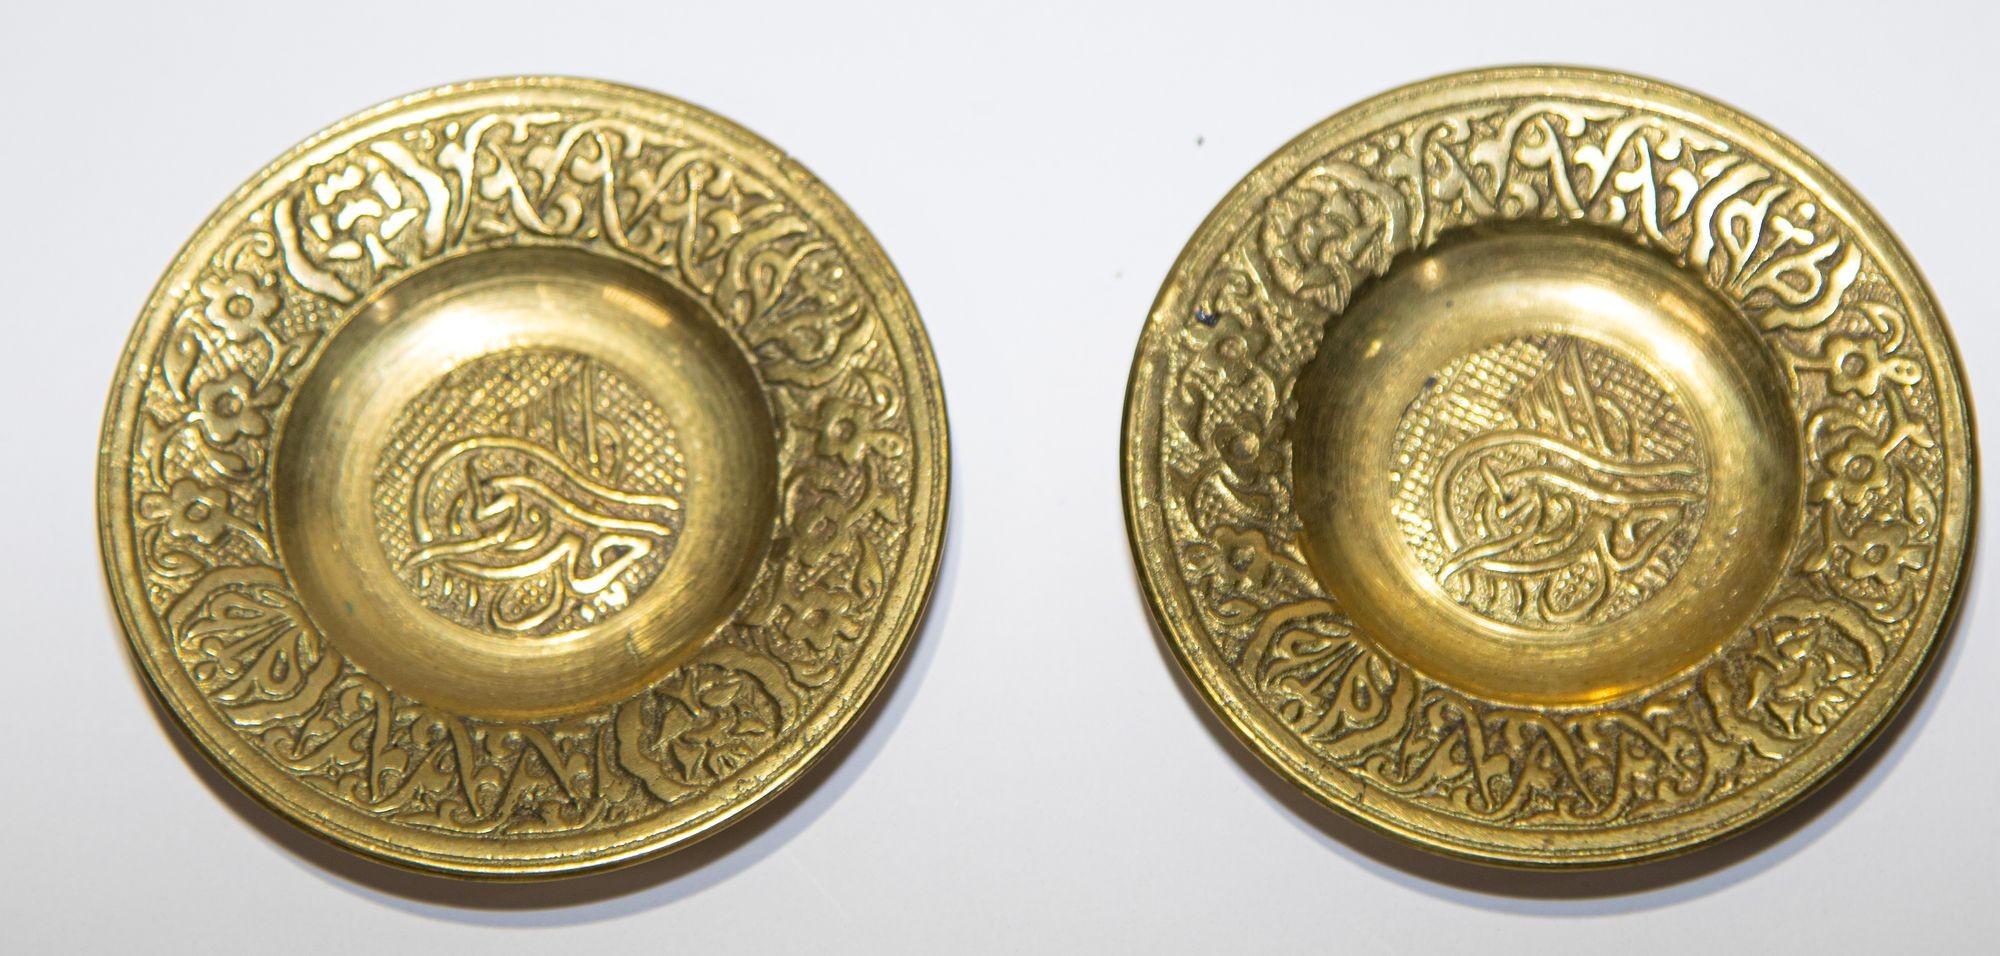 Vintage brass Turkish etched coasters set of two with the Ottoman calligraphic Tughra design in the center.
Handcrafted, embossed and etched design on brass.
Great to use as coasters for your Moroccan or tea glasses or as a collectible brass